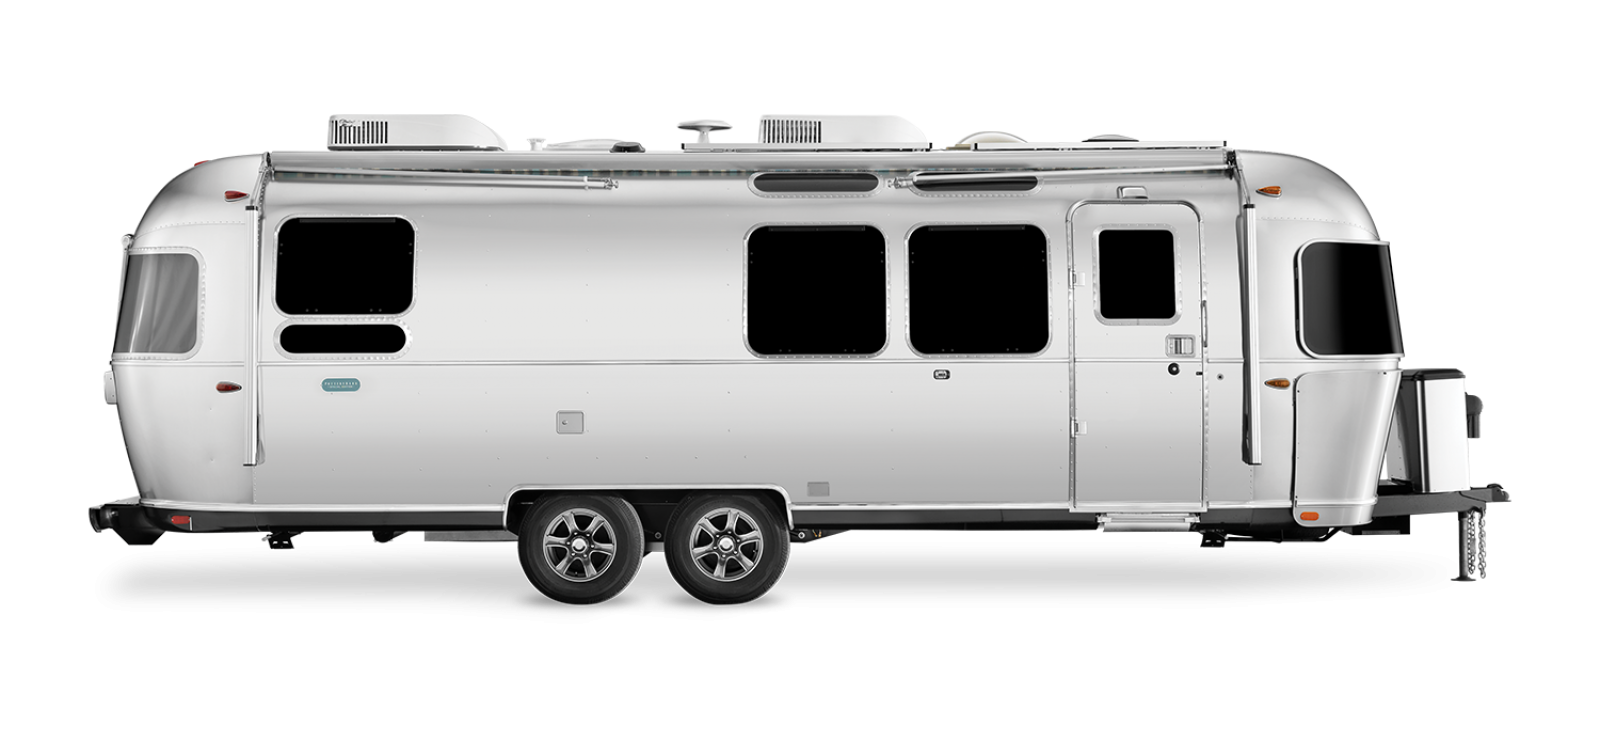 Airstream-Pottery-Barn-28RB-Exterior-Curb